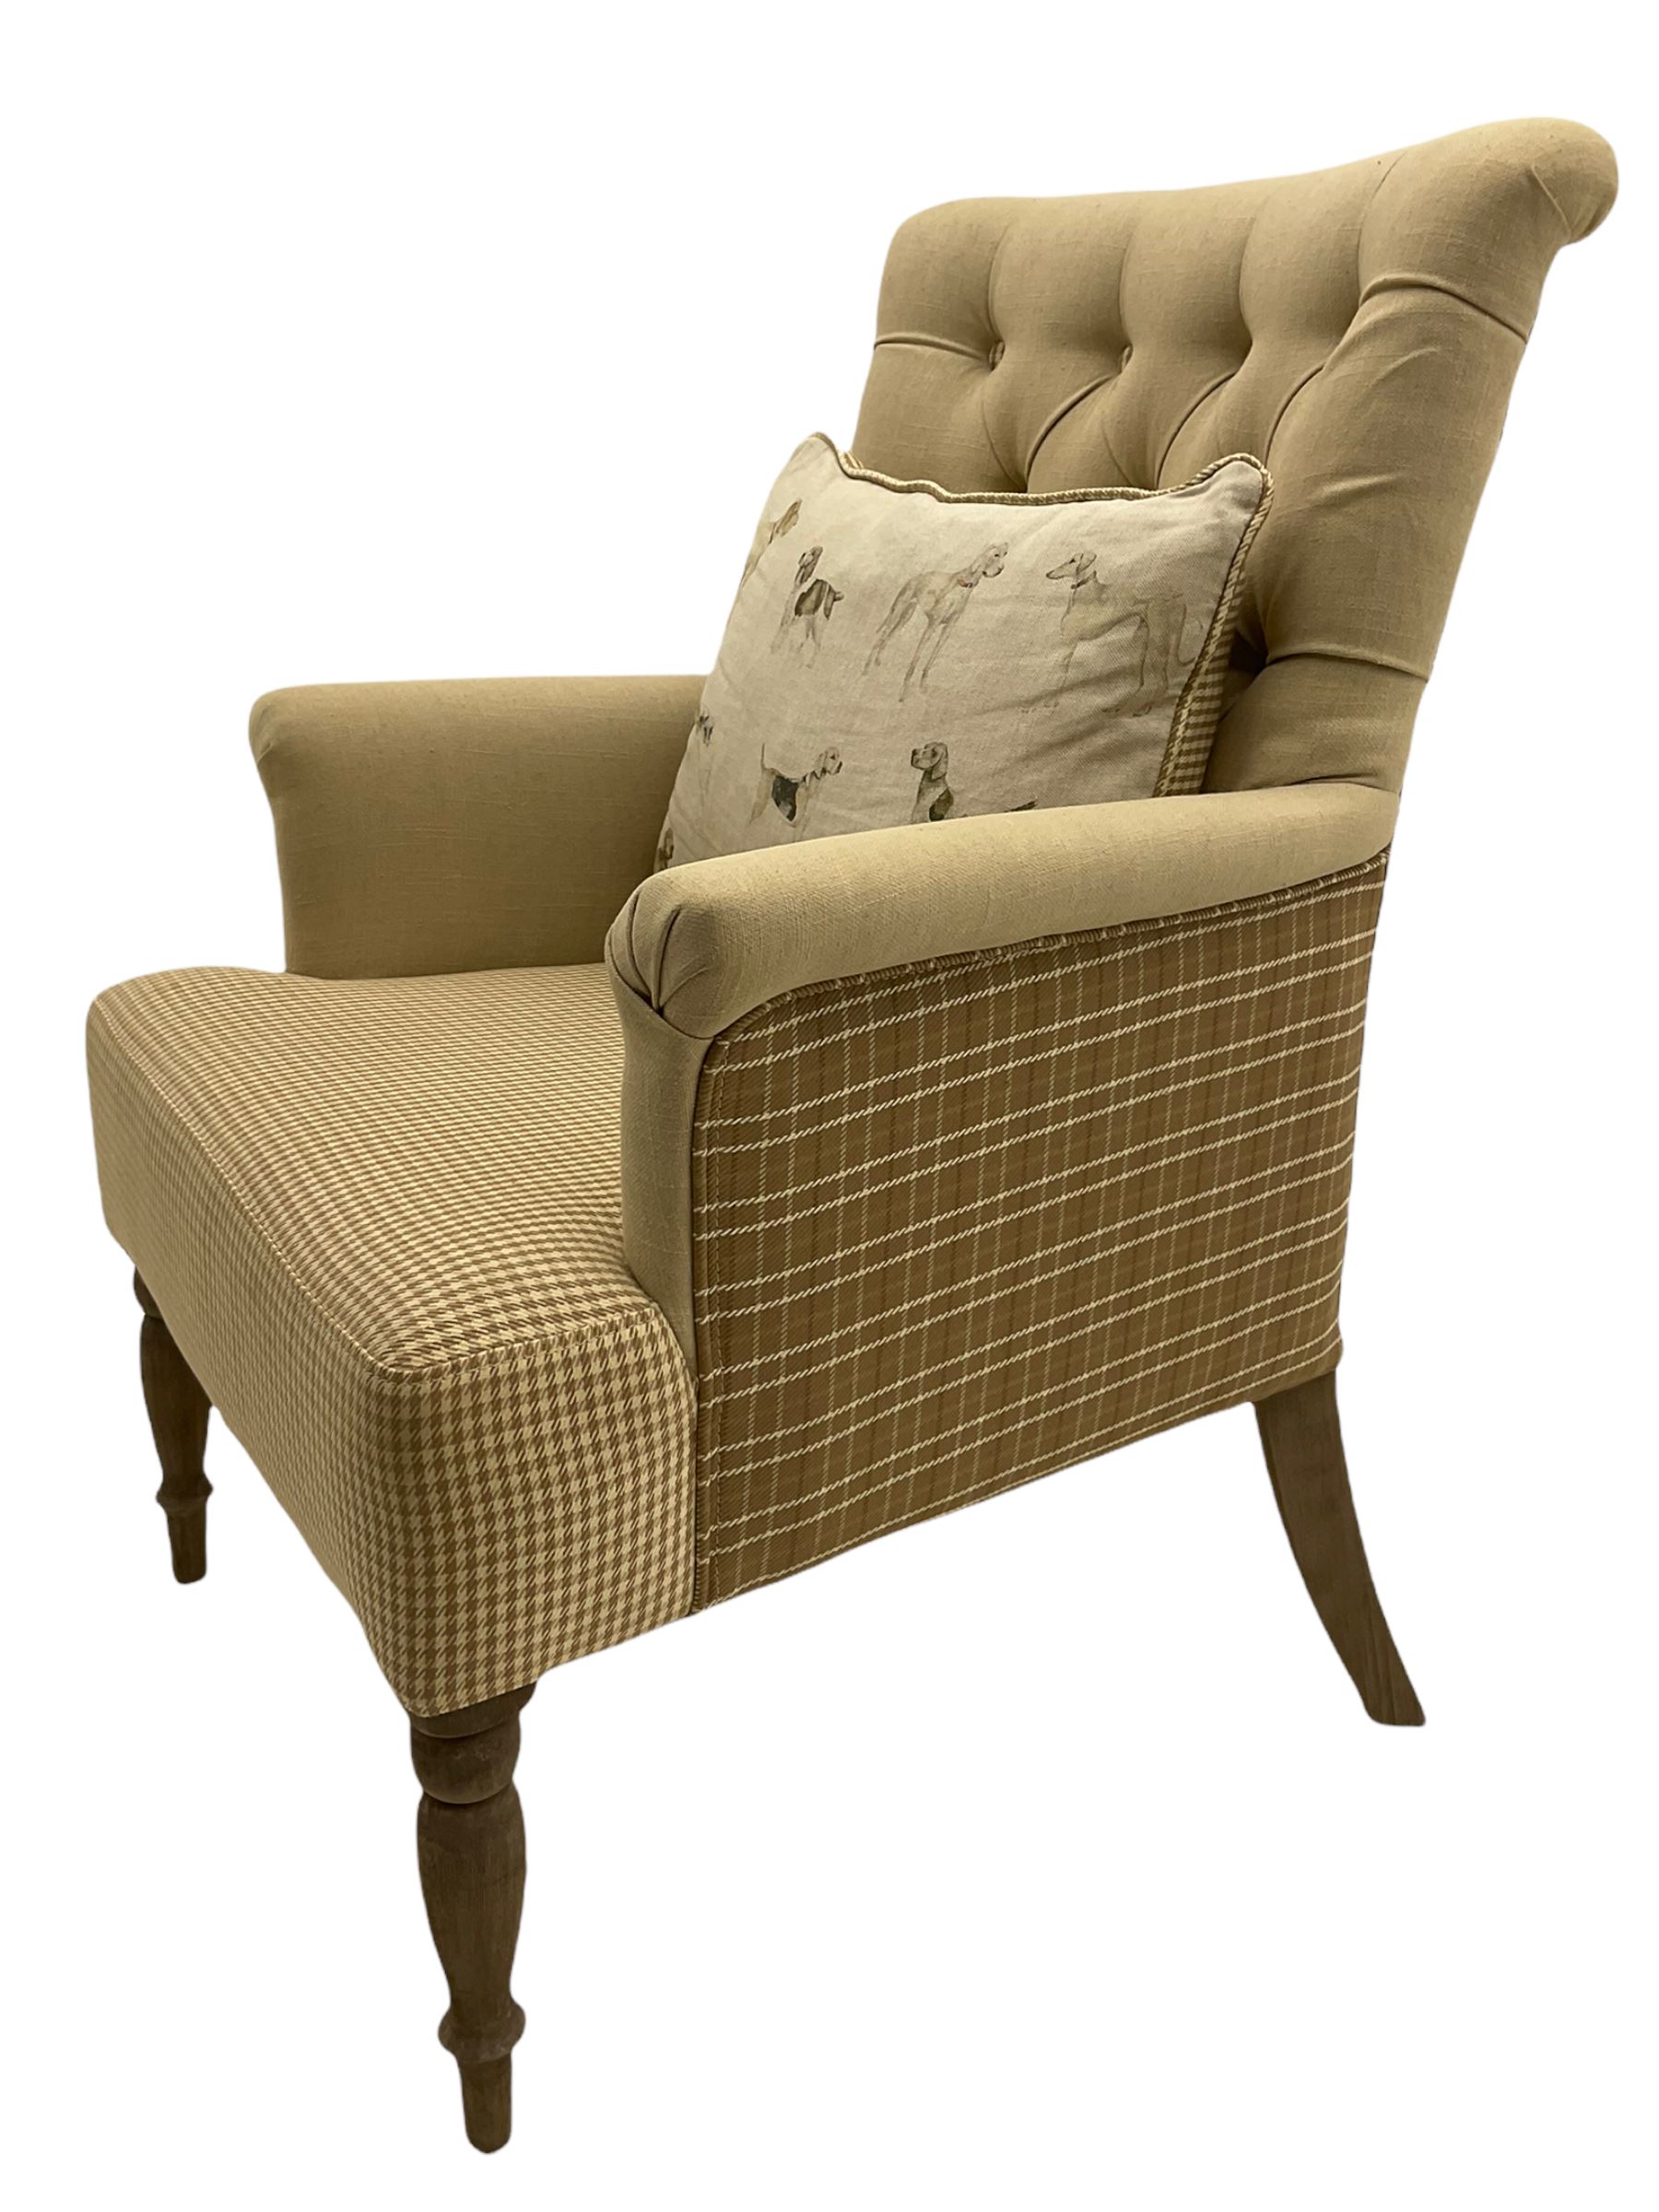 Voyage Maisonette - Nero Armchair upholstered in beige and check fabric - Image 4 of 8